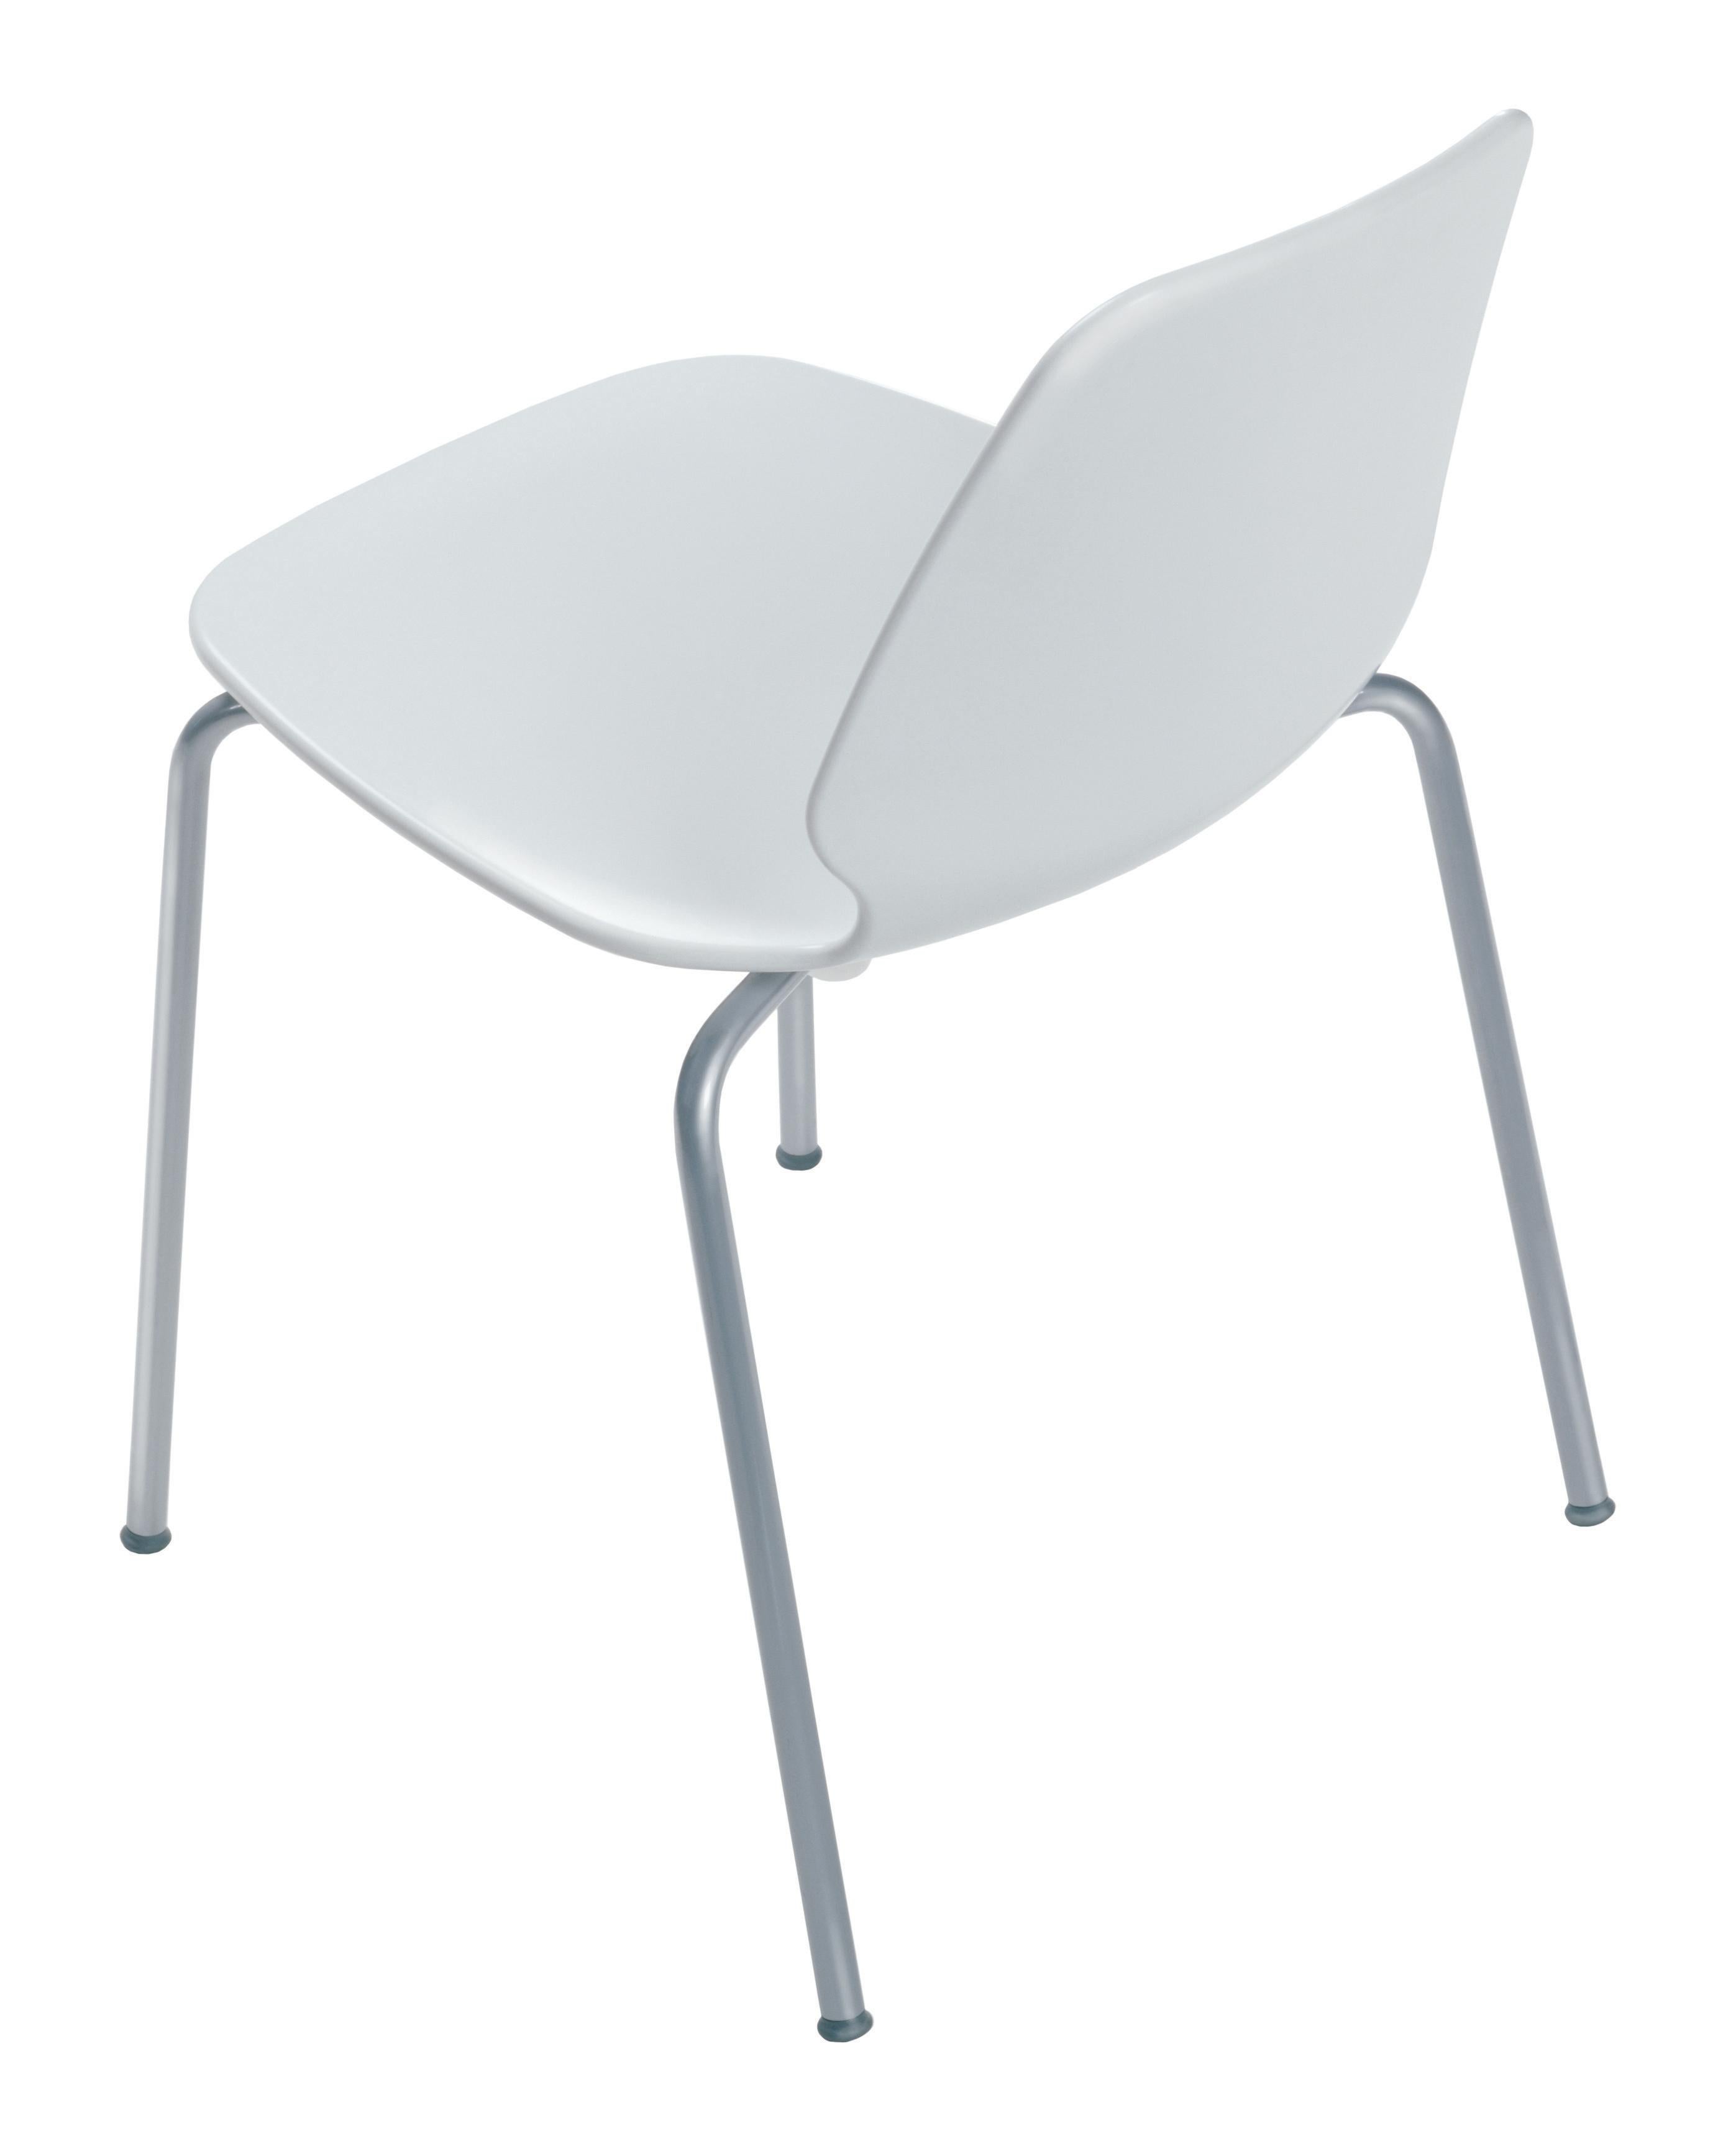 Italian Alias 530 Selinunte Chair in White and Chromed Steel Frame by Alfredo Häberli For Sale